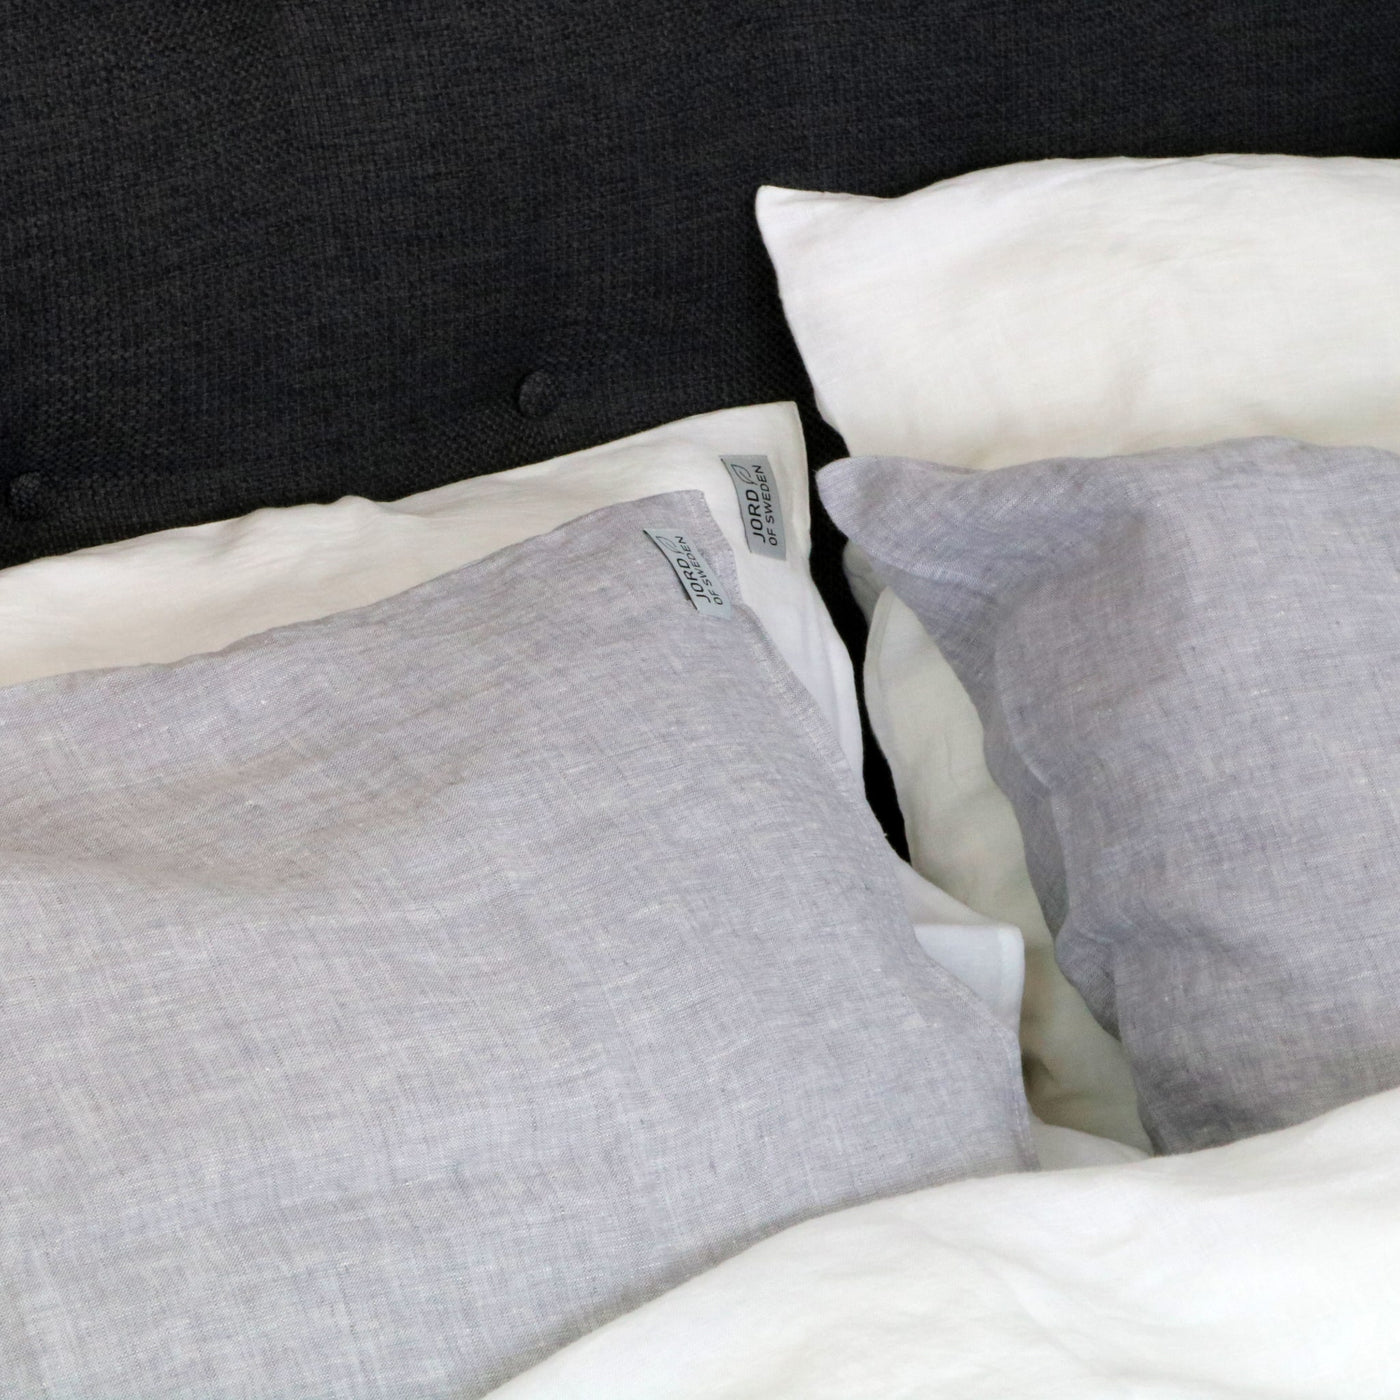 Linen duvet and pillow cover in misty gray color